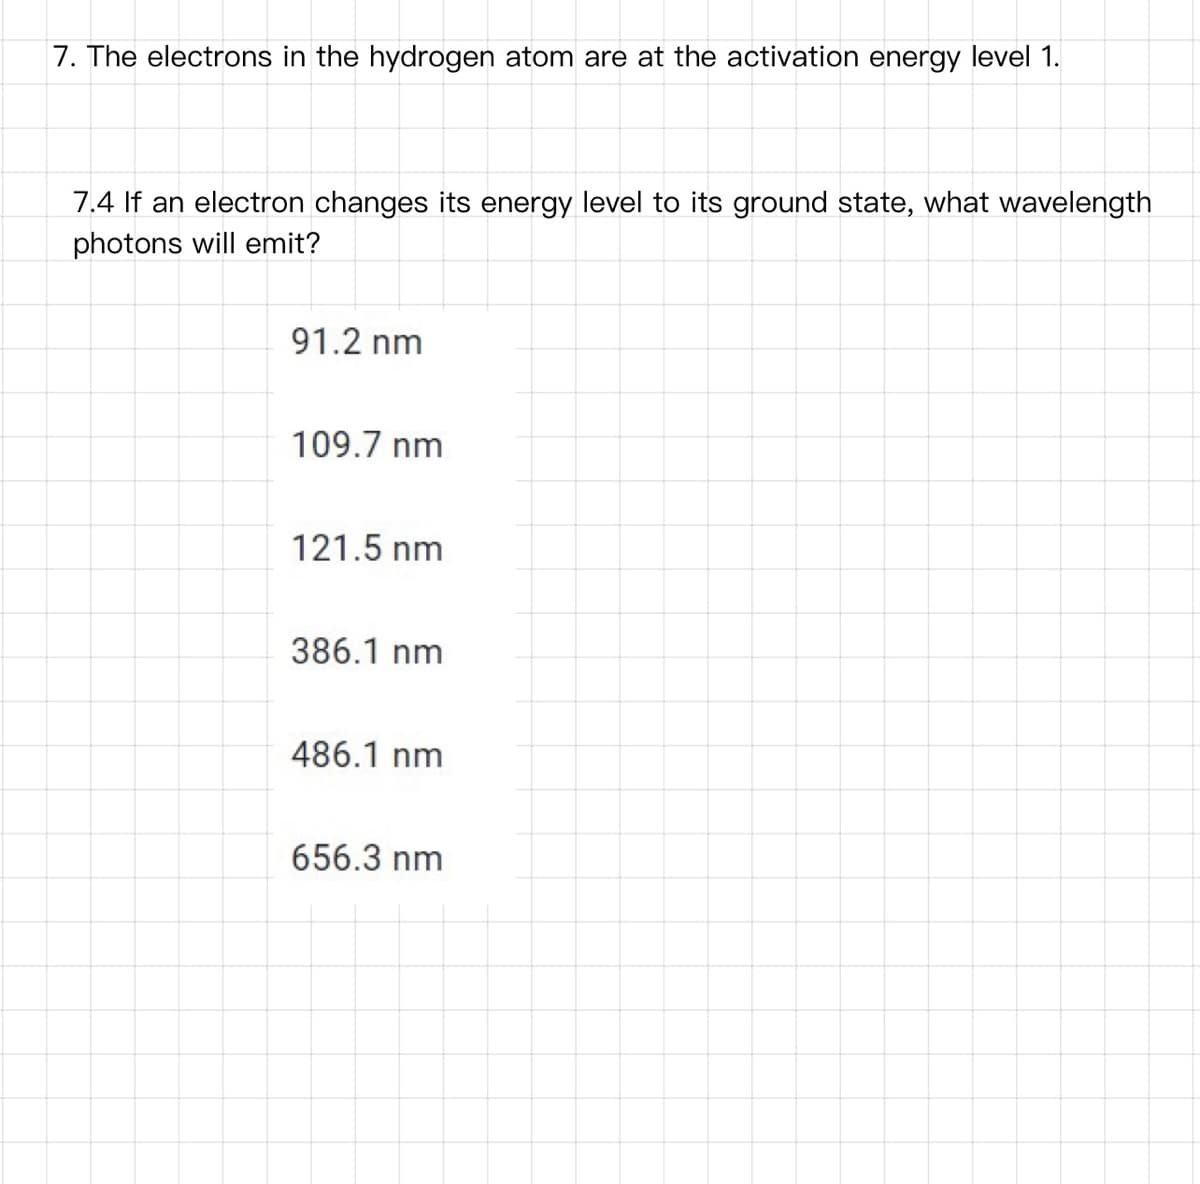 7. The electrons in the hydrogen atom are at the activation energy level 1.
7.4 If an electron changes its energy level to its ground state, what wavelength
photons will emit?
91.2 nm
109.7 nm
121.5 nm
386.1 nm
486.1 nm
656.3 nm
